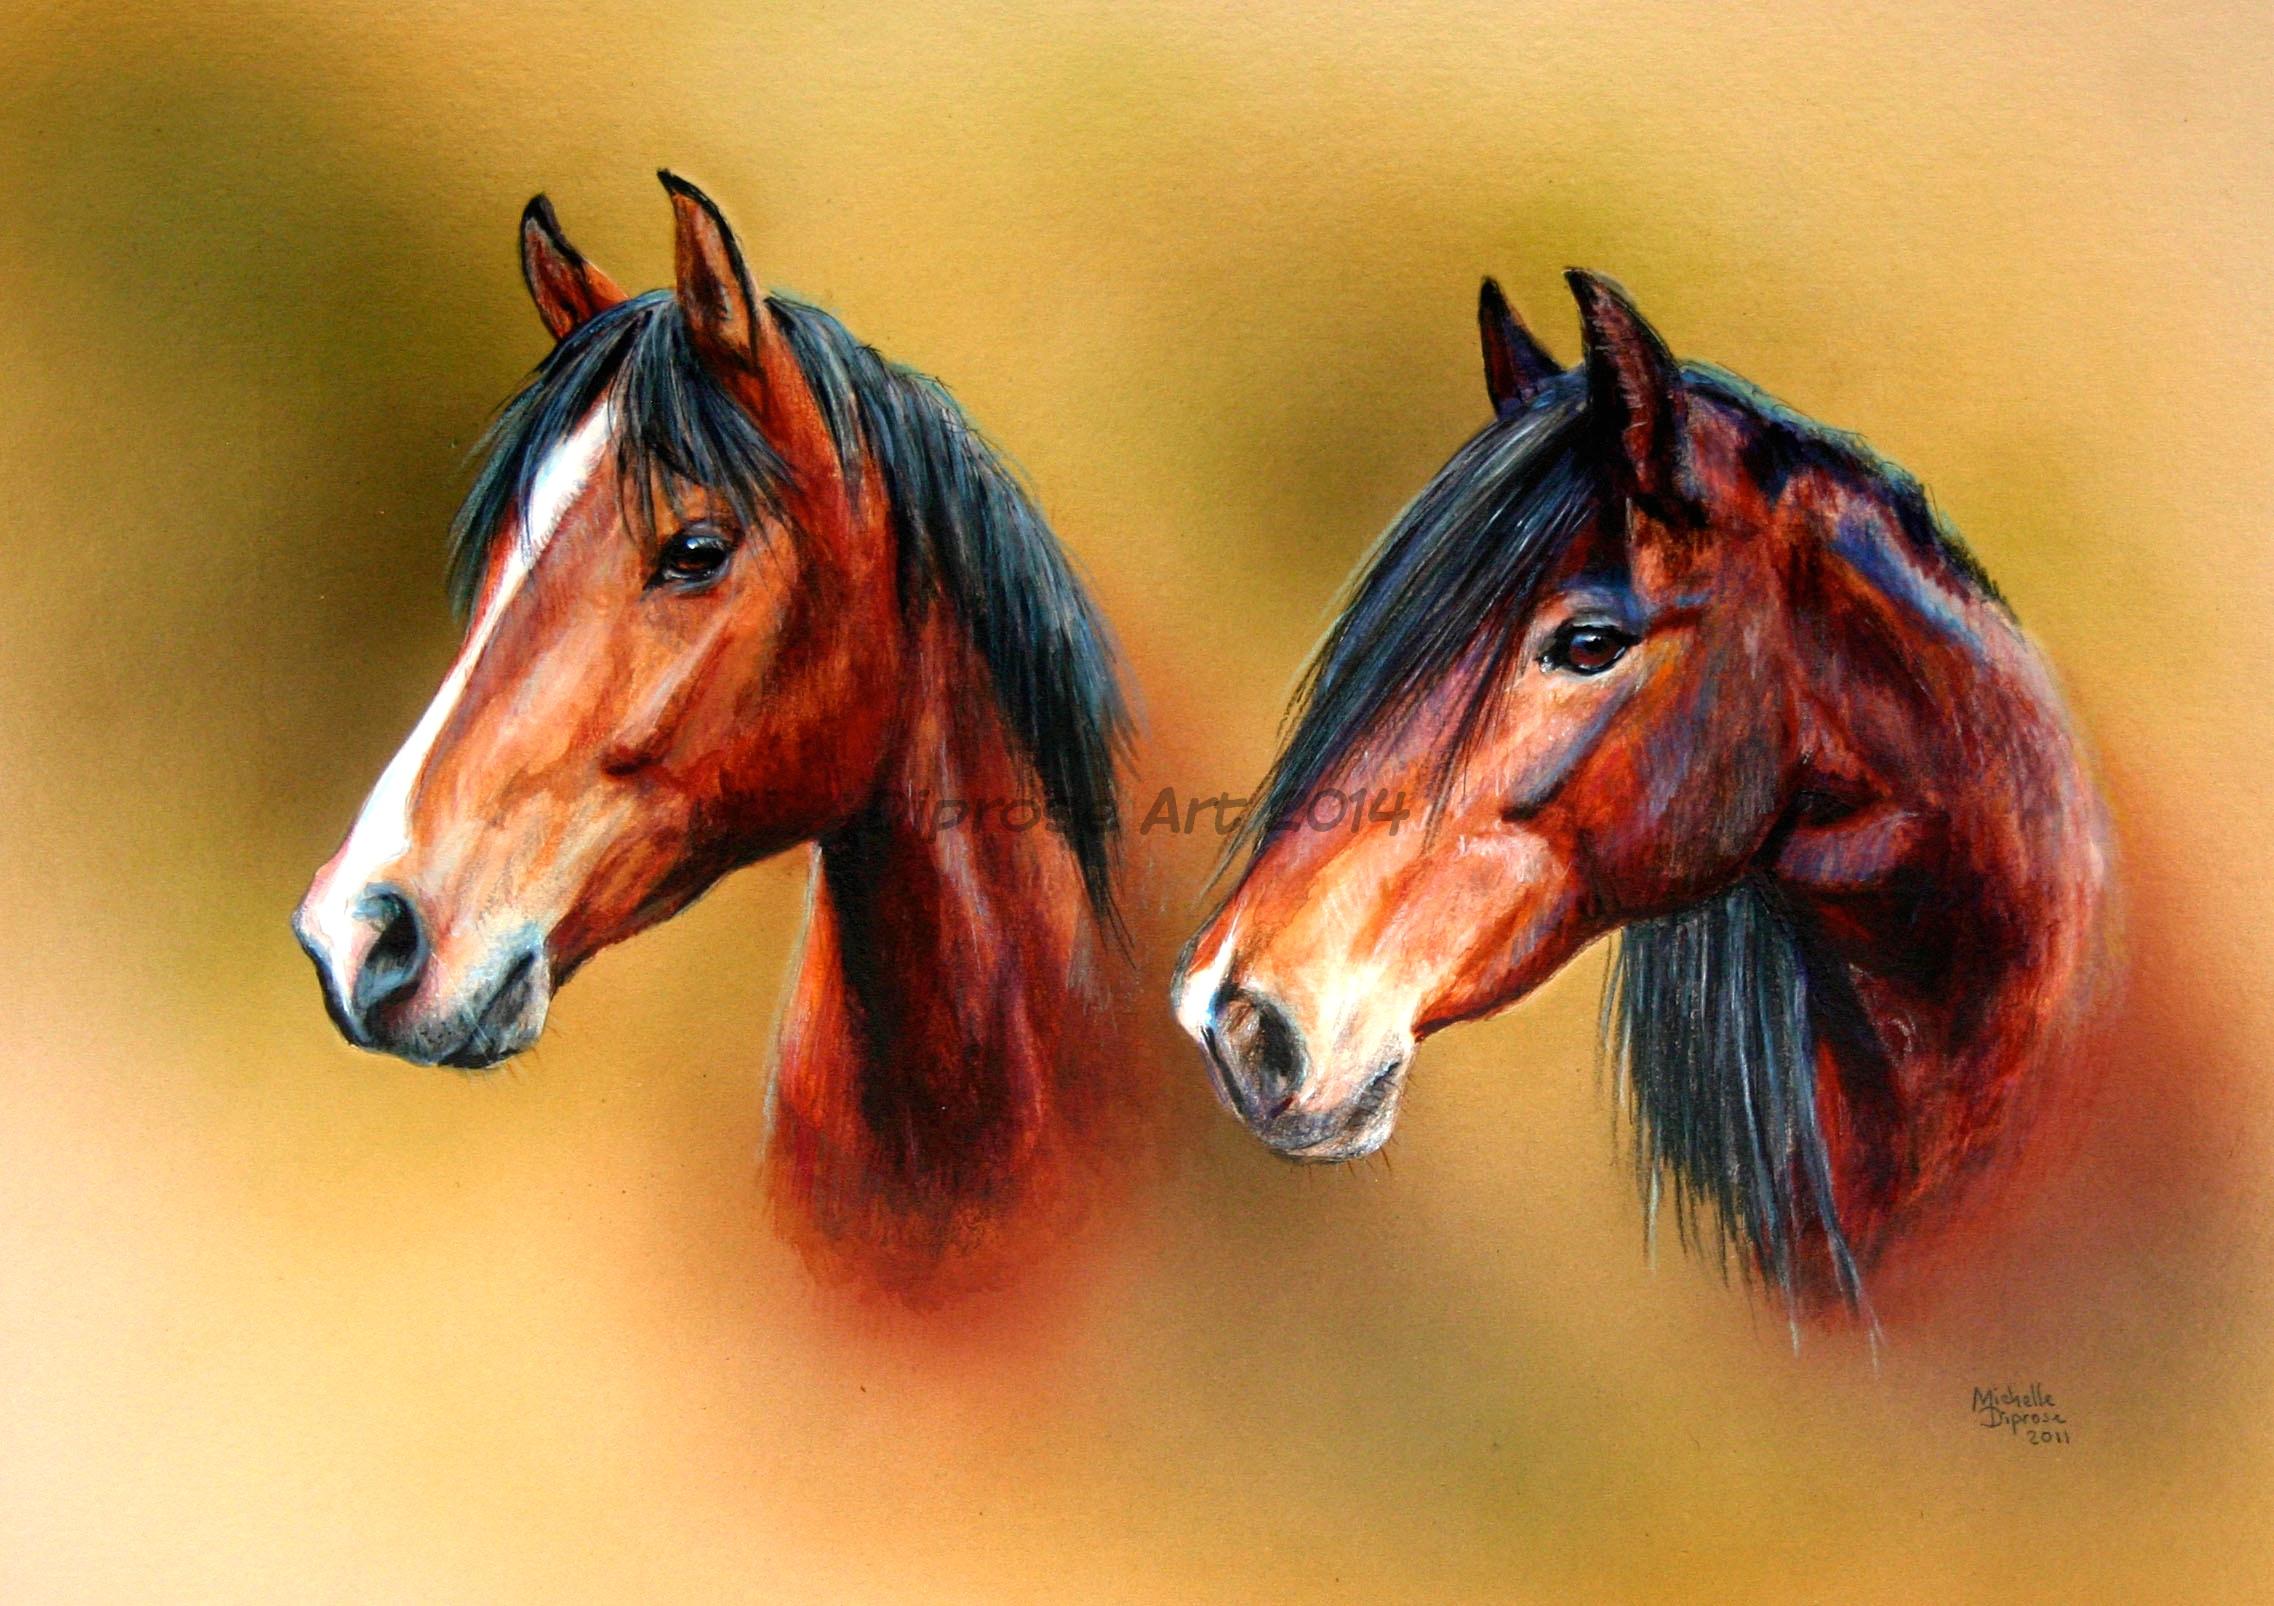 Acrylics on board - approx A3 - horse portraits - Horses nowadays generally have their manes pulled within an inch of their lives for neatness and ease but in truth I like to see them looking natural and flowing.